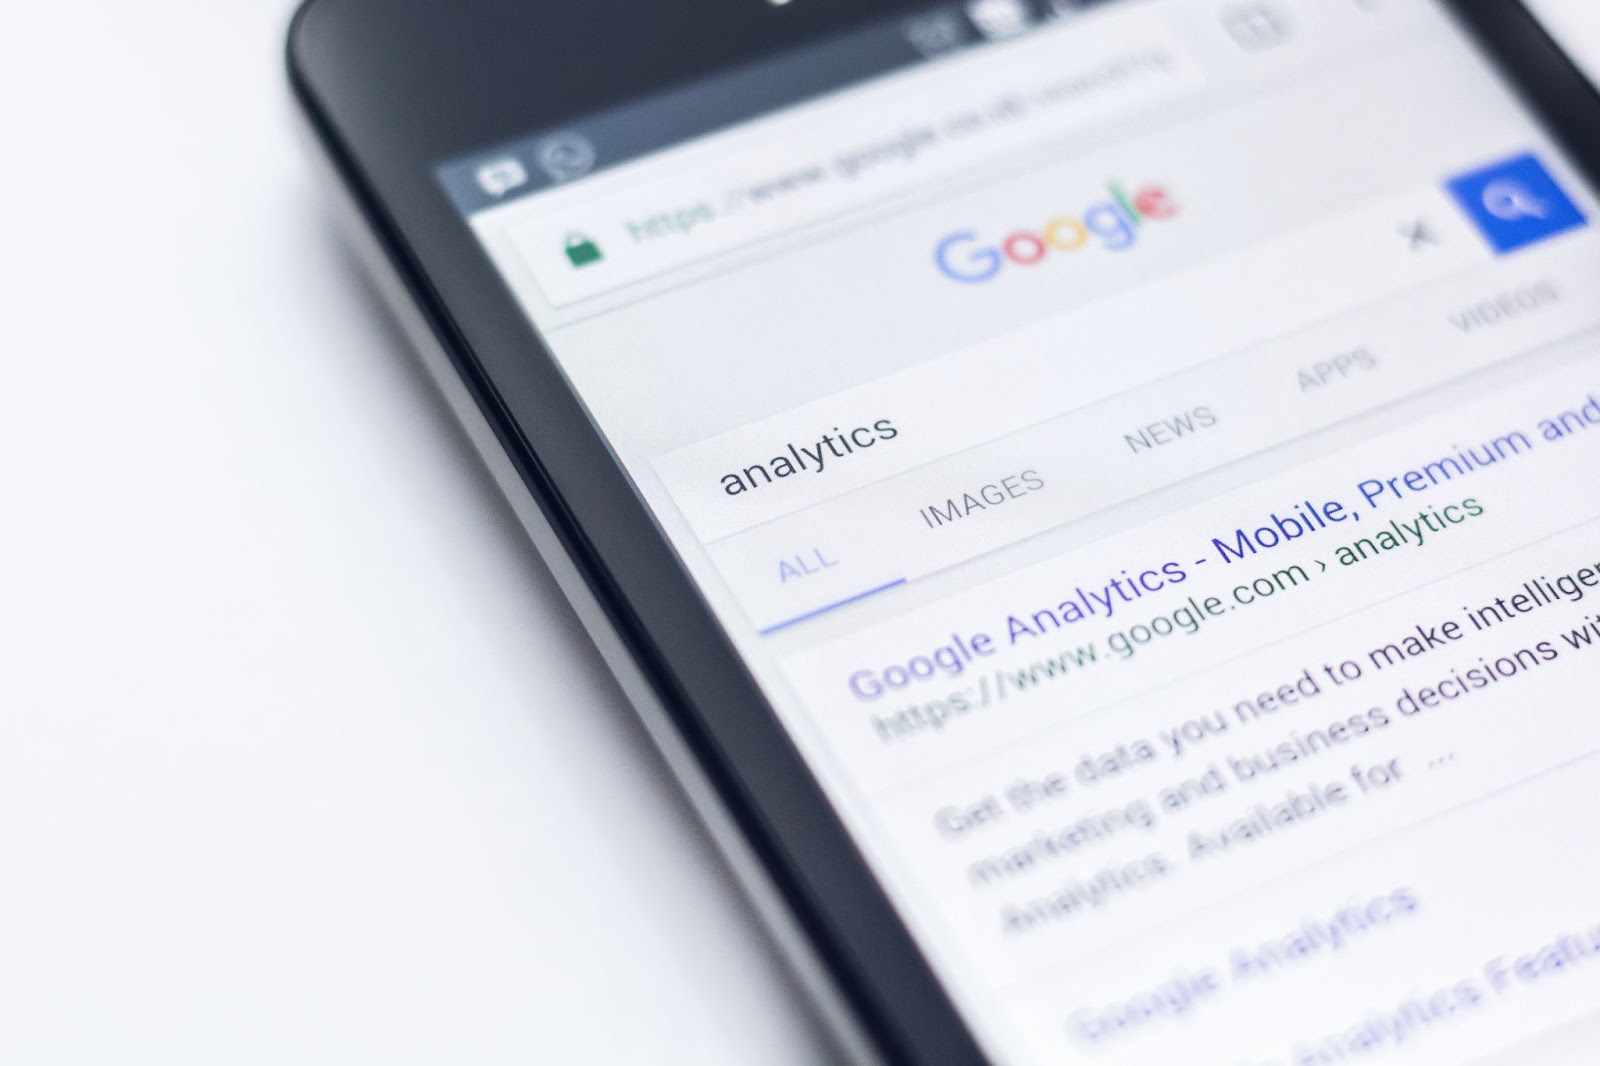 Smartphone's screen showing Google's search bar with 'analytics' in the search bar